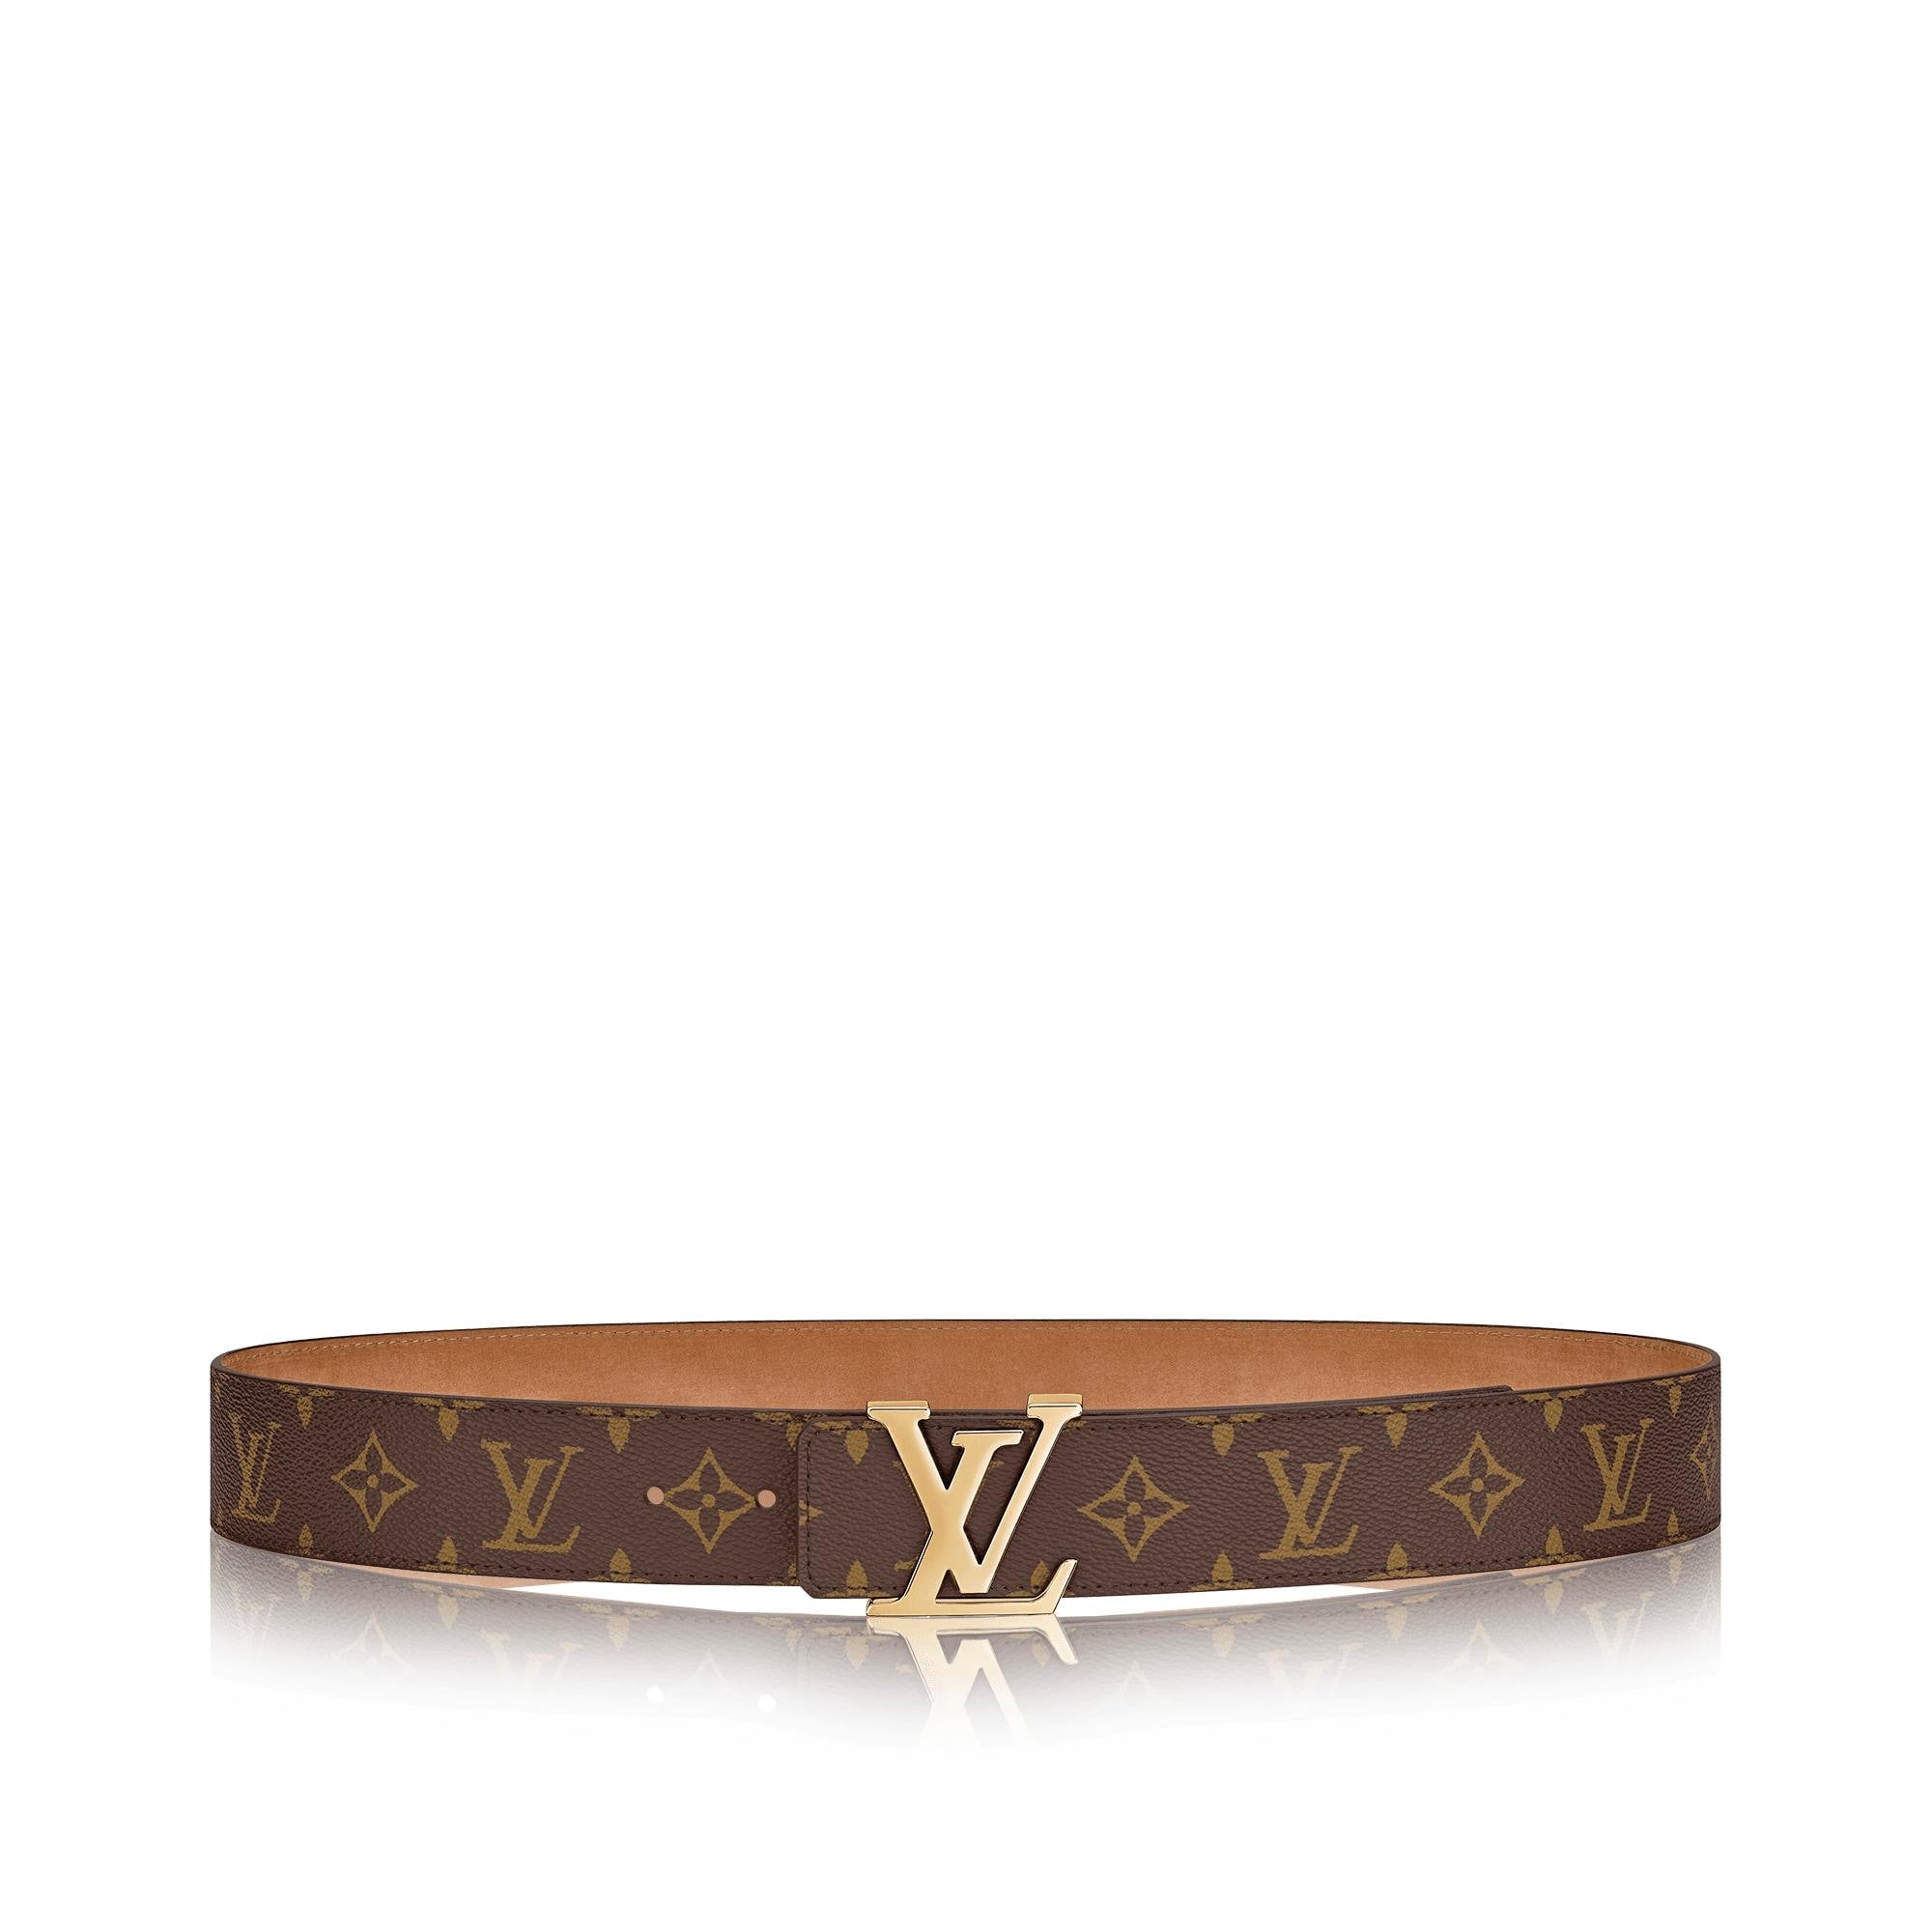 Authentic Louis Vuitton brown monogram belt, trade for iPhone 7 or